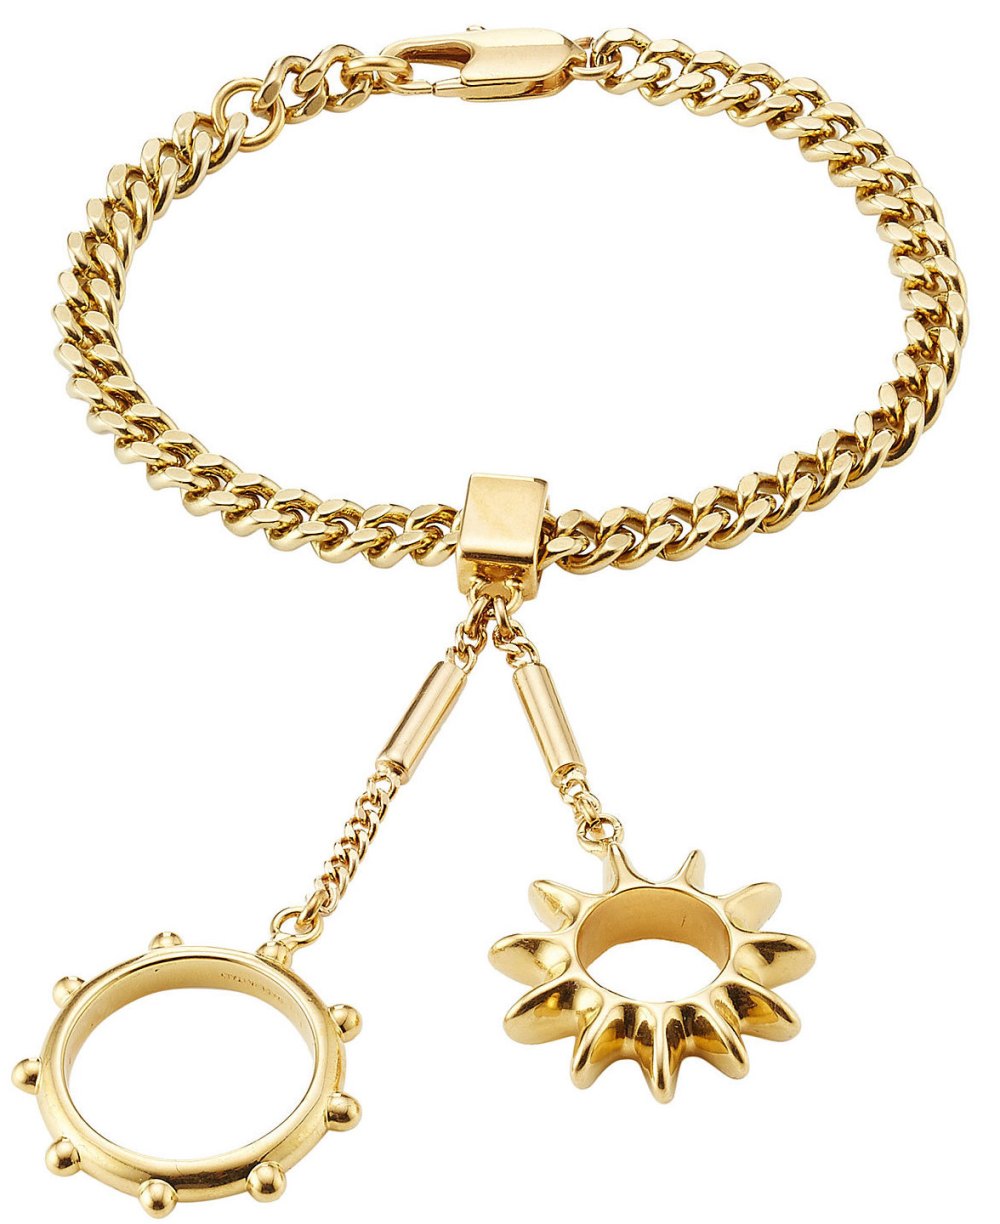 Chloé Bracelet with Rings Attached